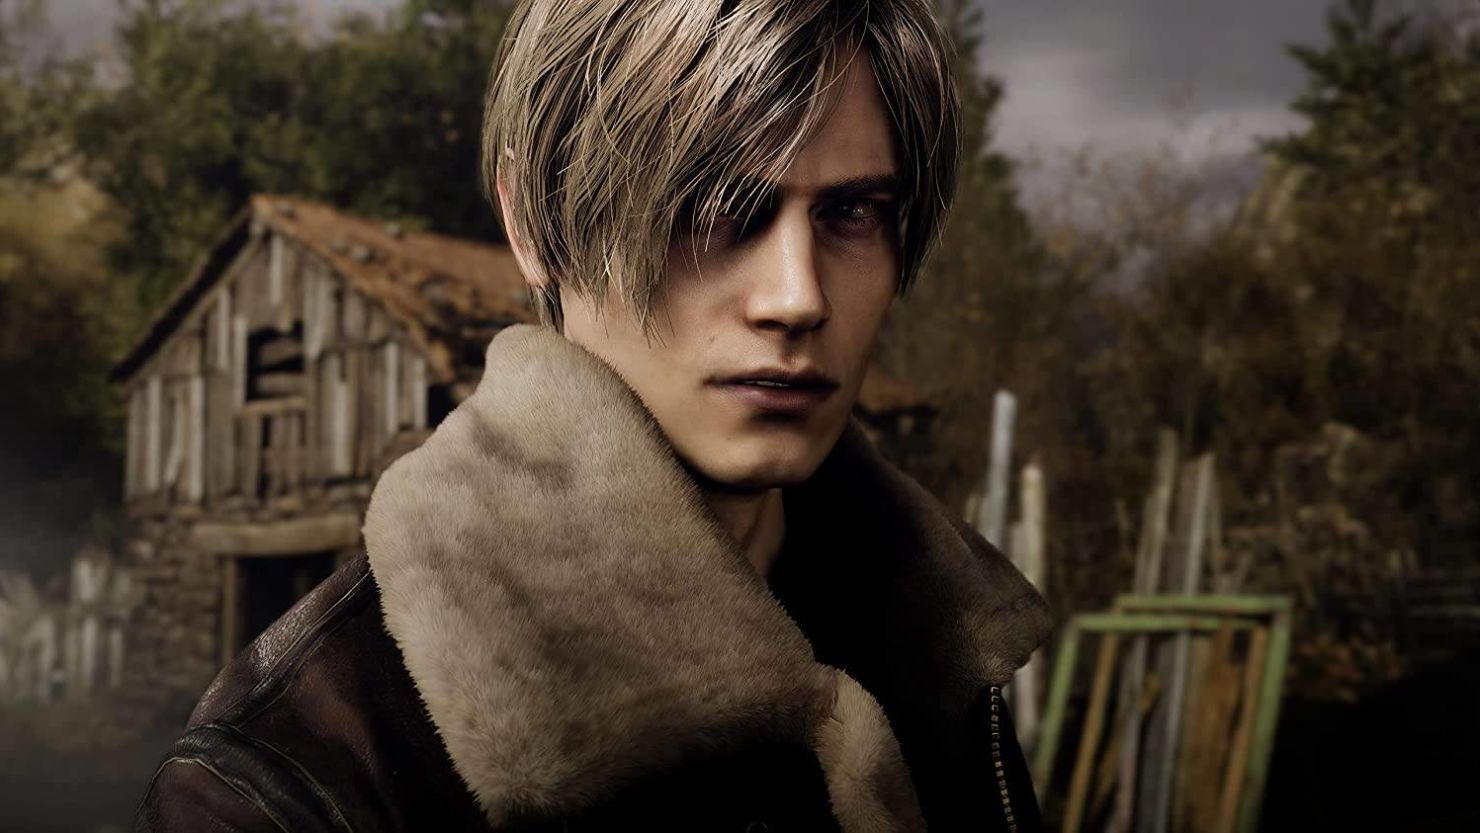 Resident Evil 4 Remake: where to buy the game, prices, and